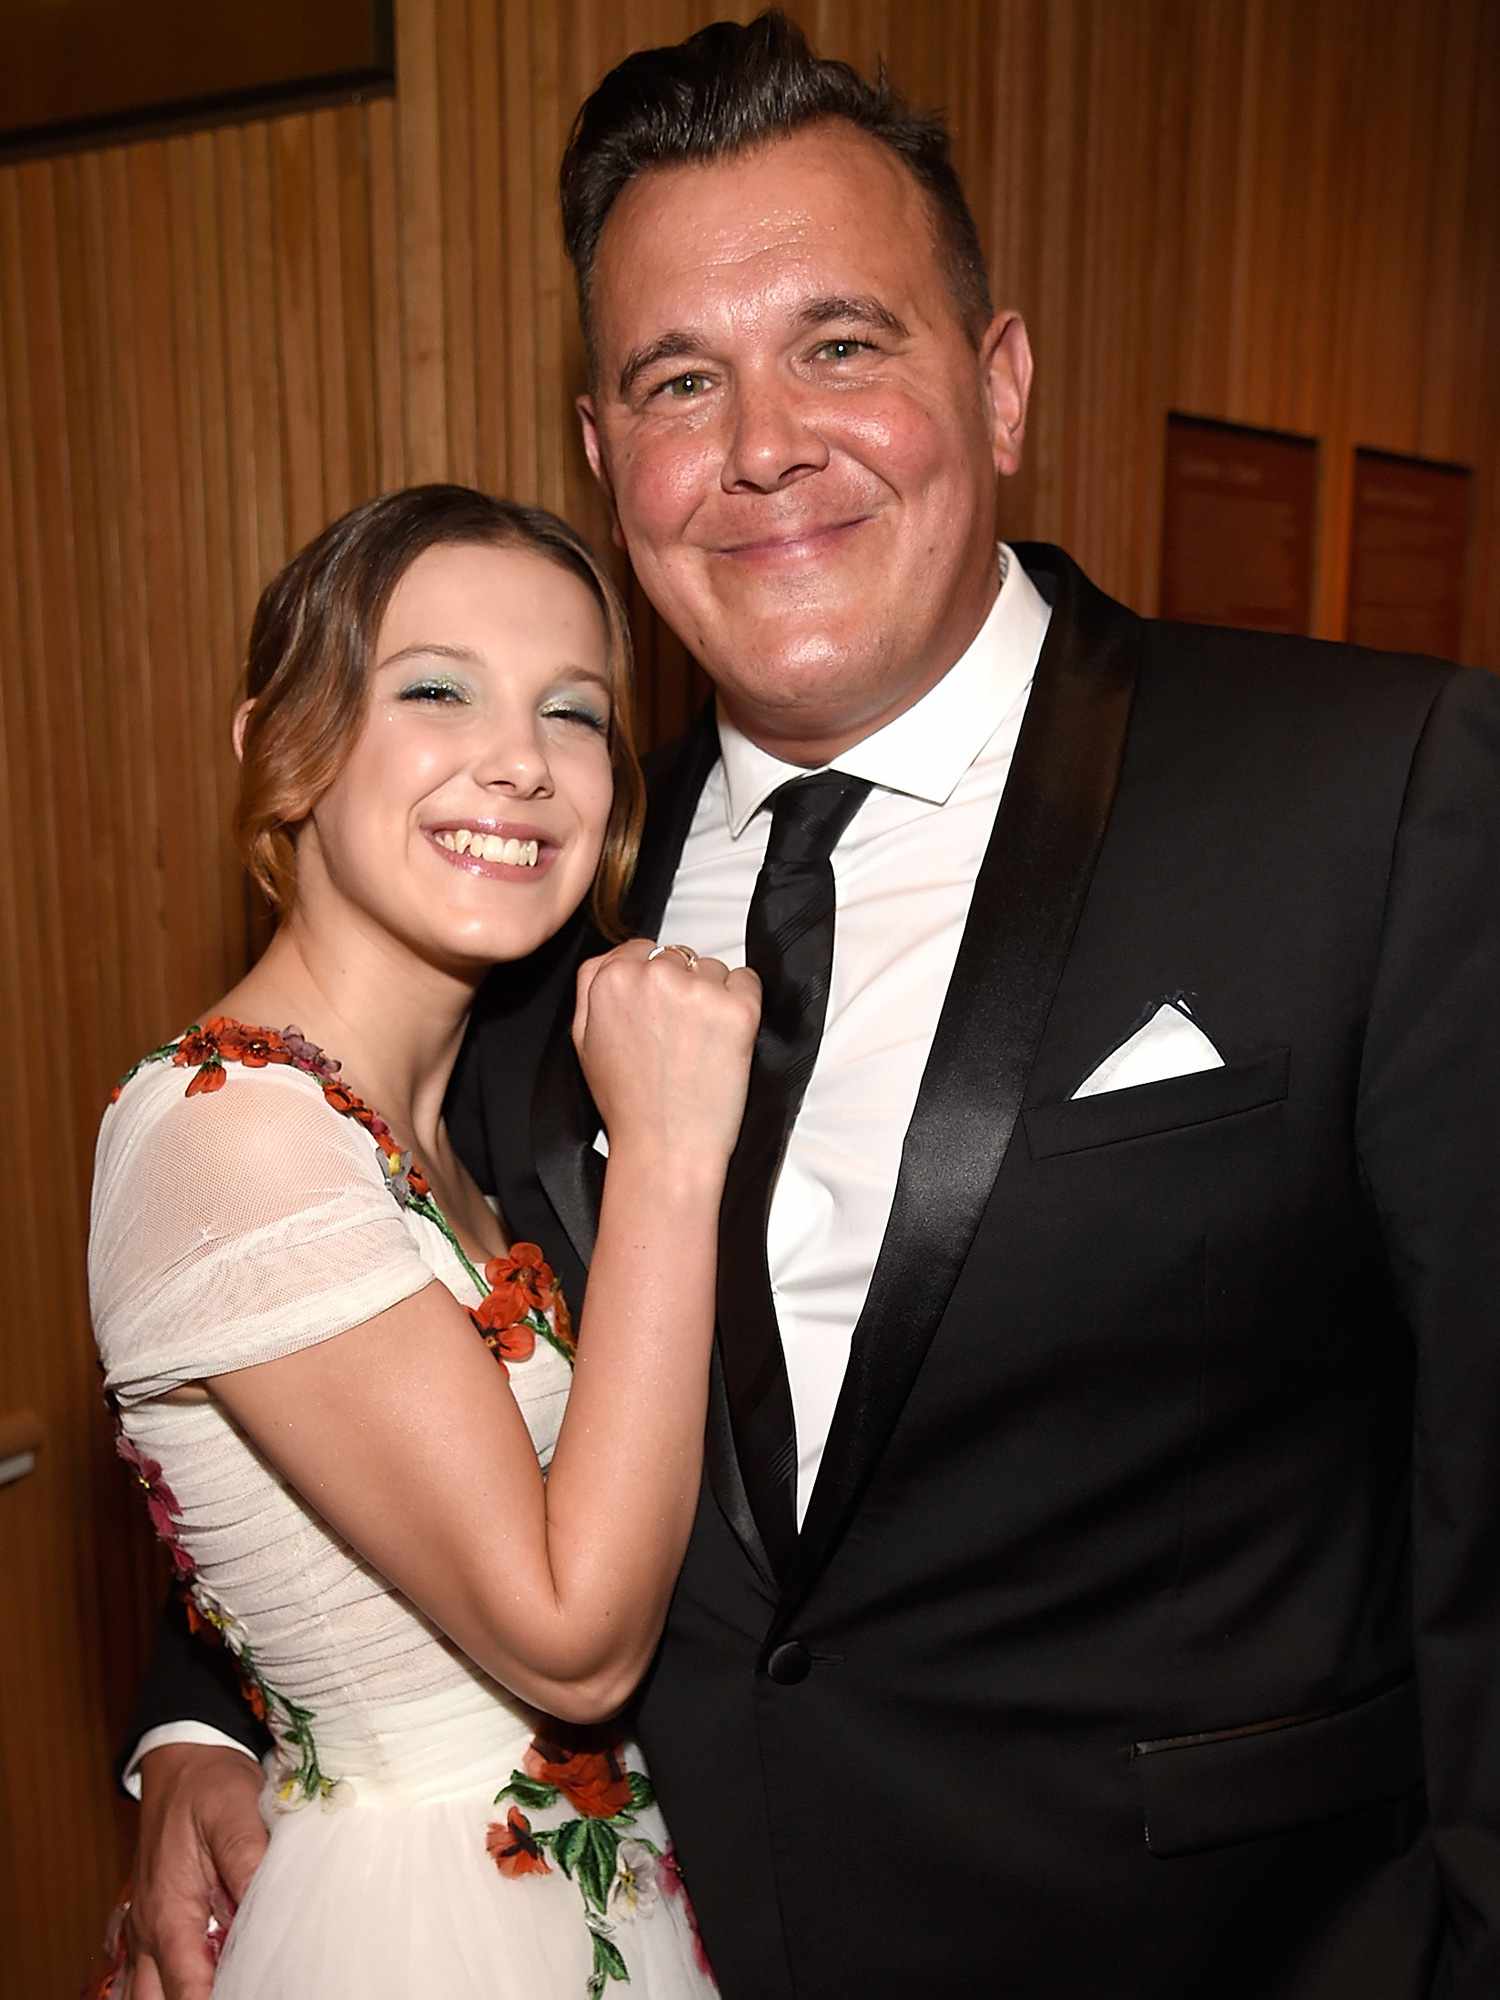 Millie Bobby Brown and Robert Brown at the 2018 Time 100 Gala.